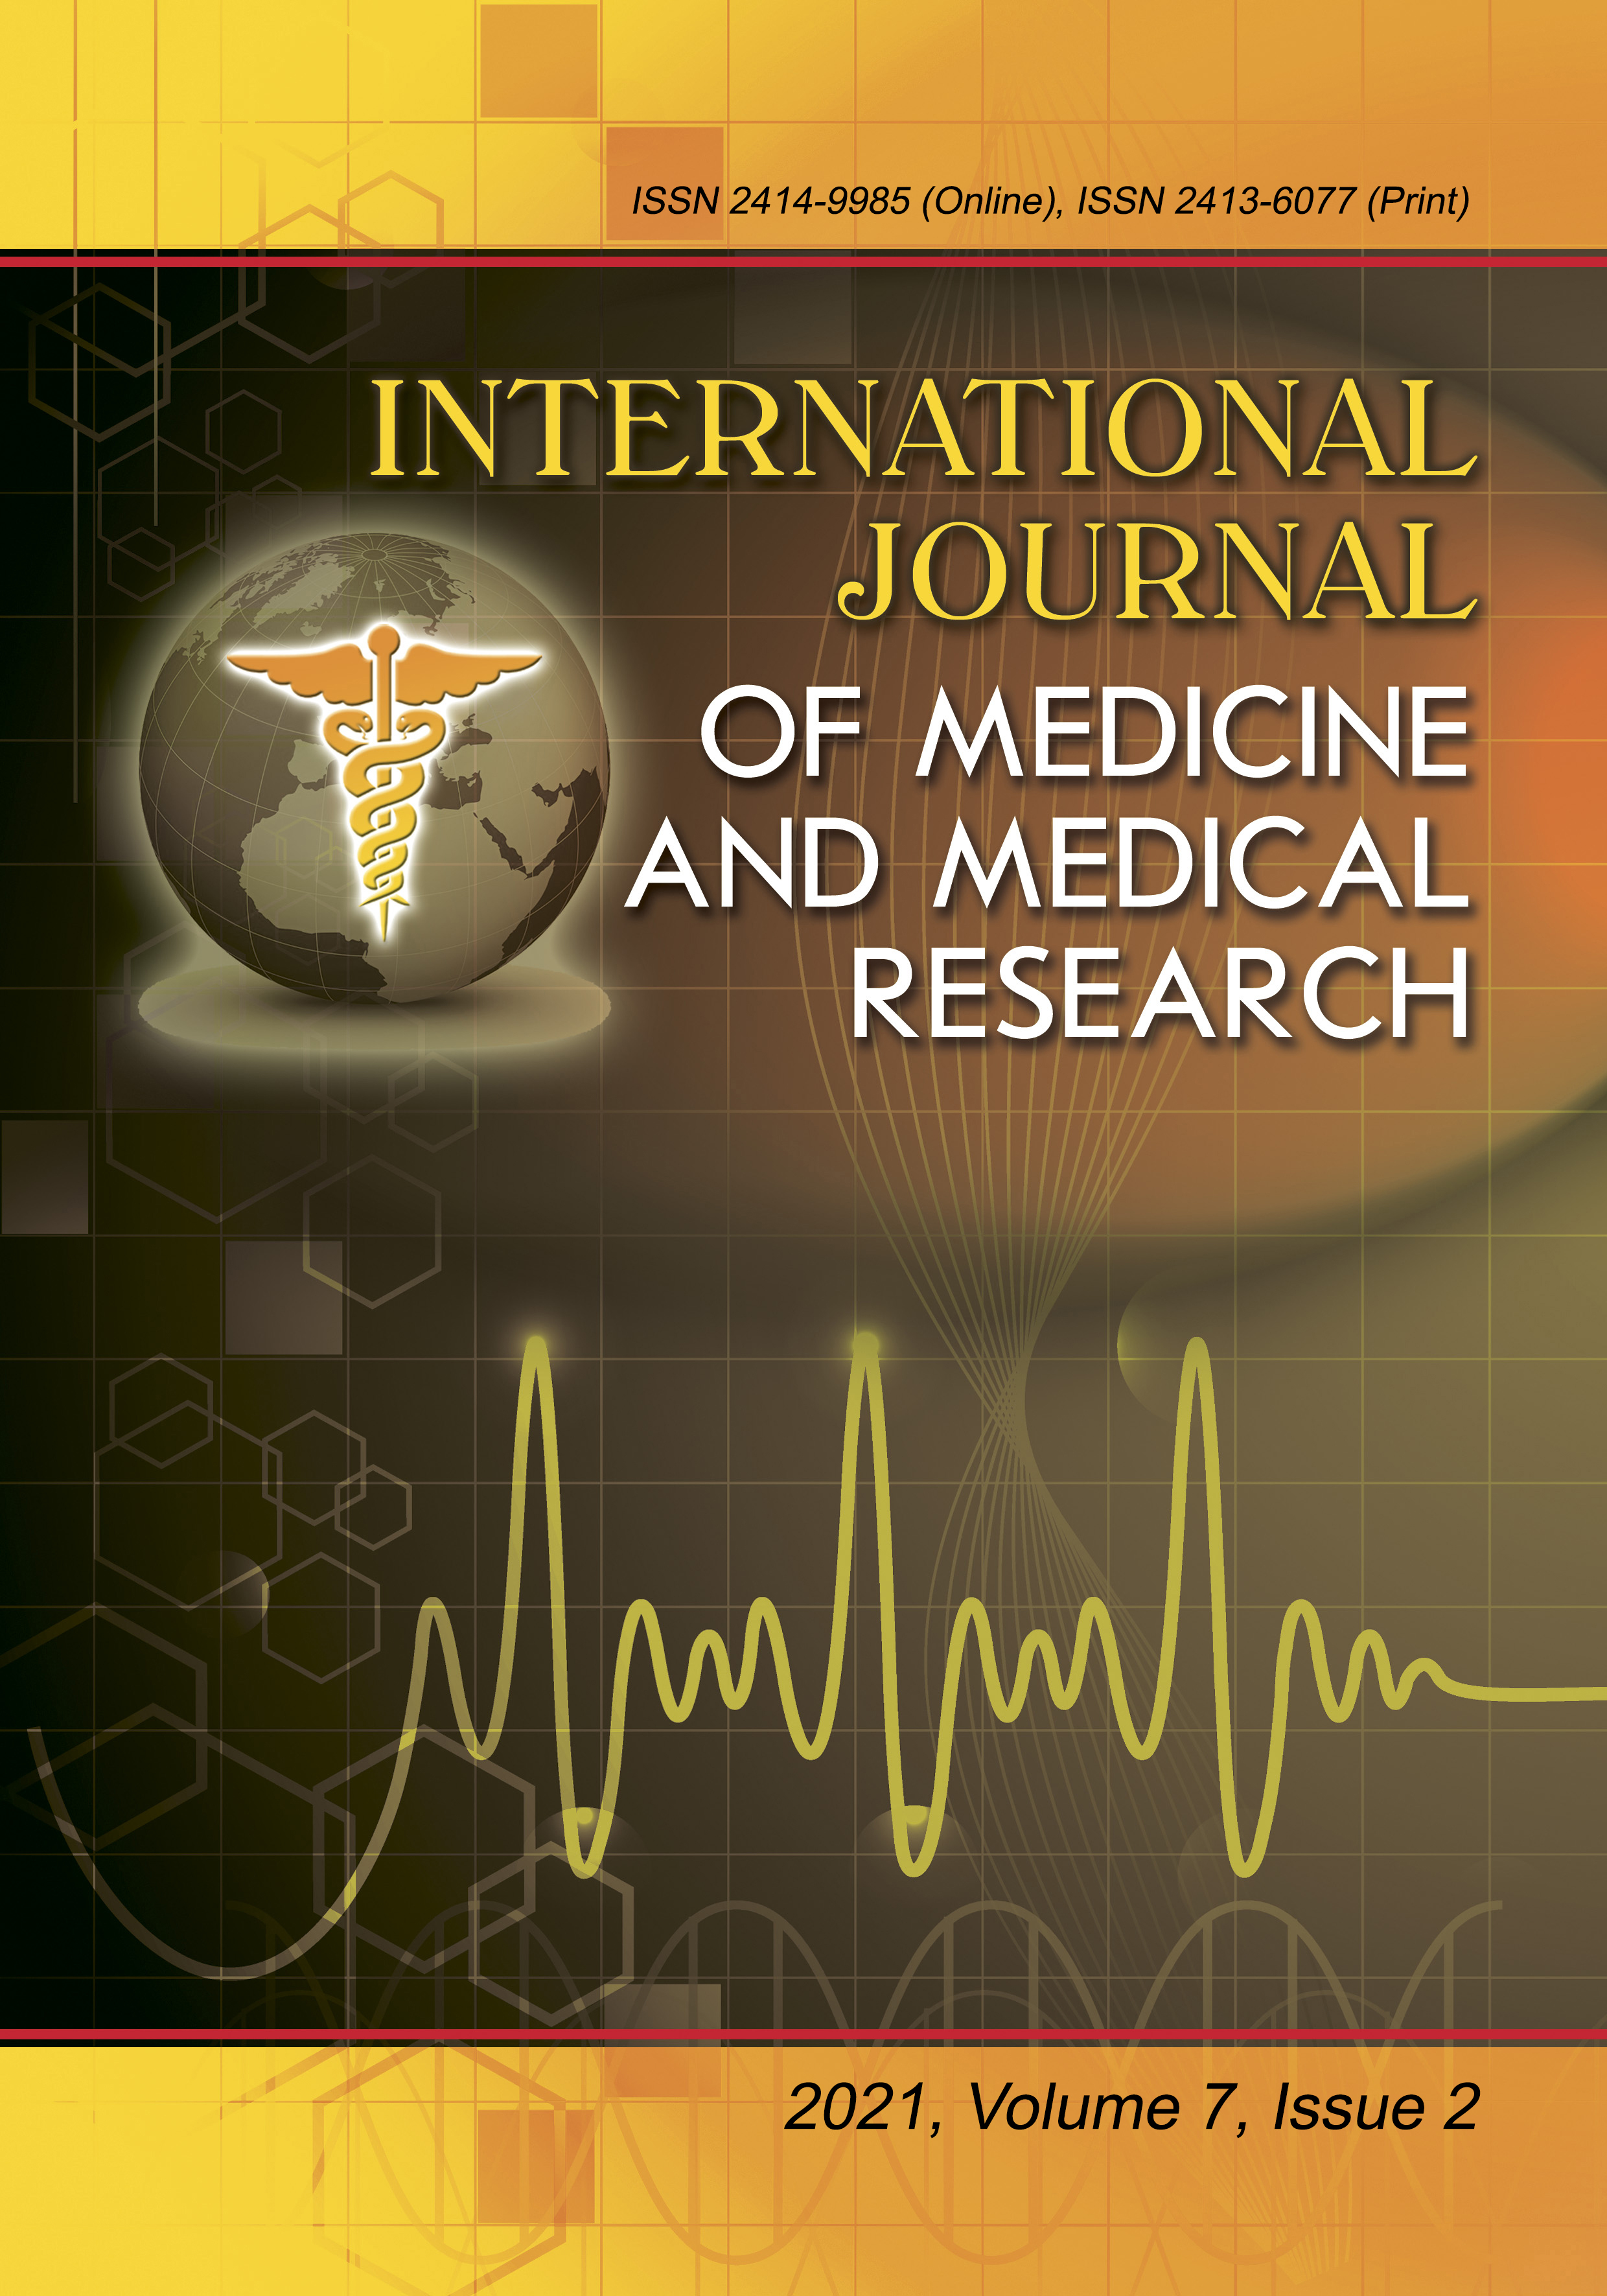 					View Vol. 7 No. 2 (2021): International Journal of Medicine and Medical Research
				